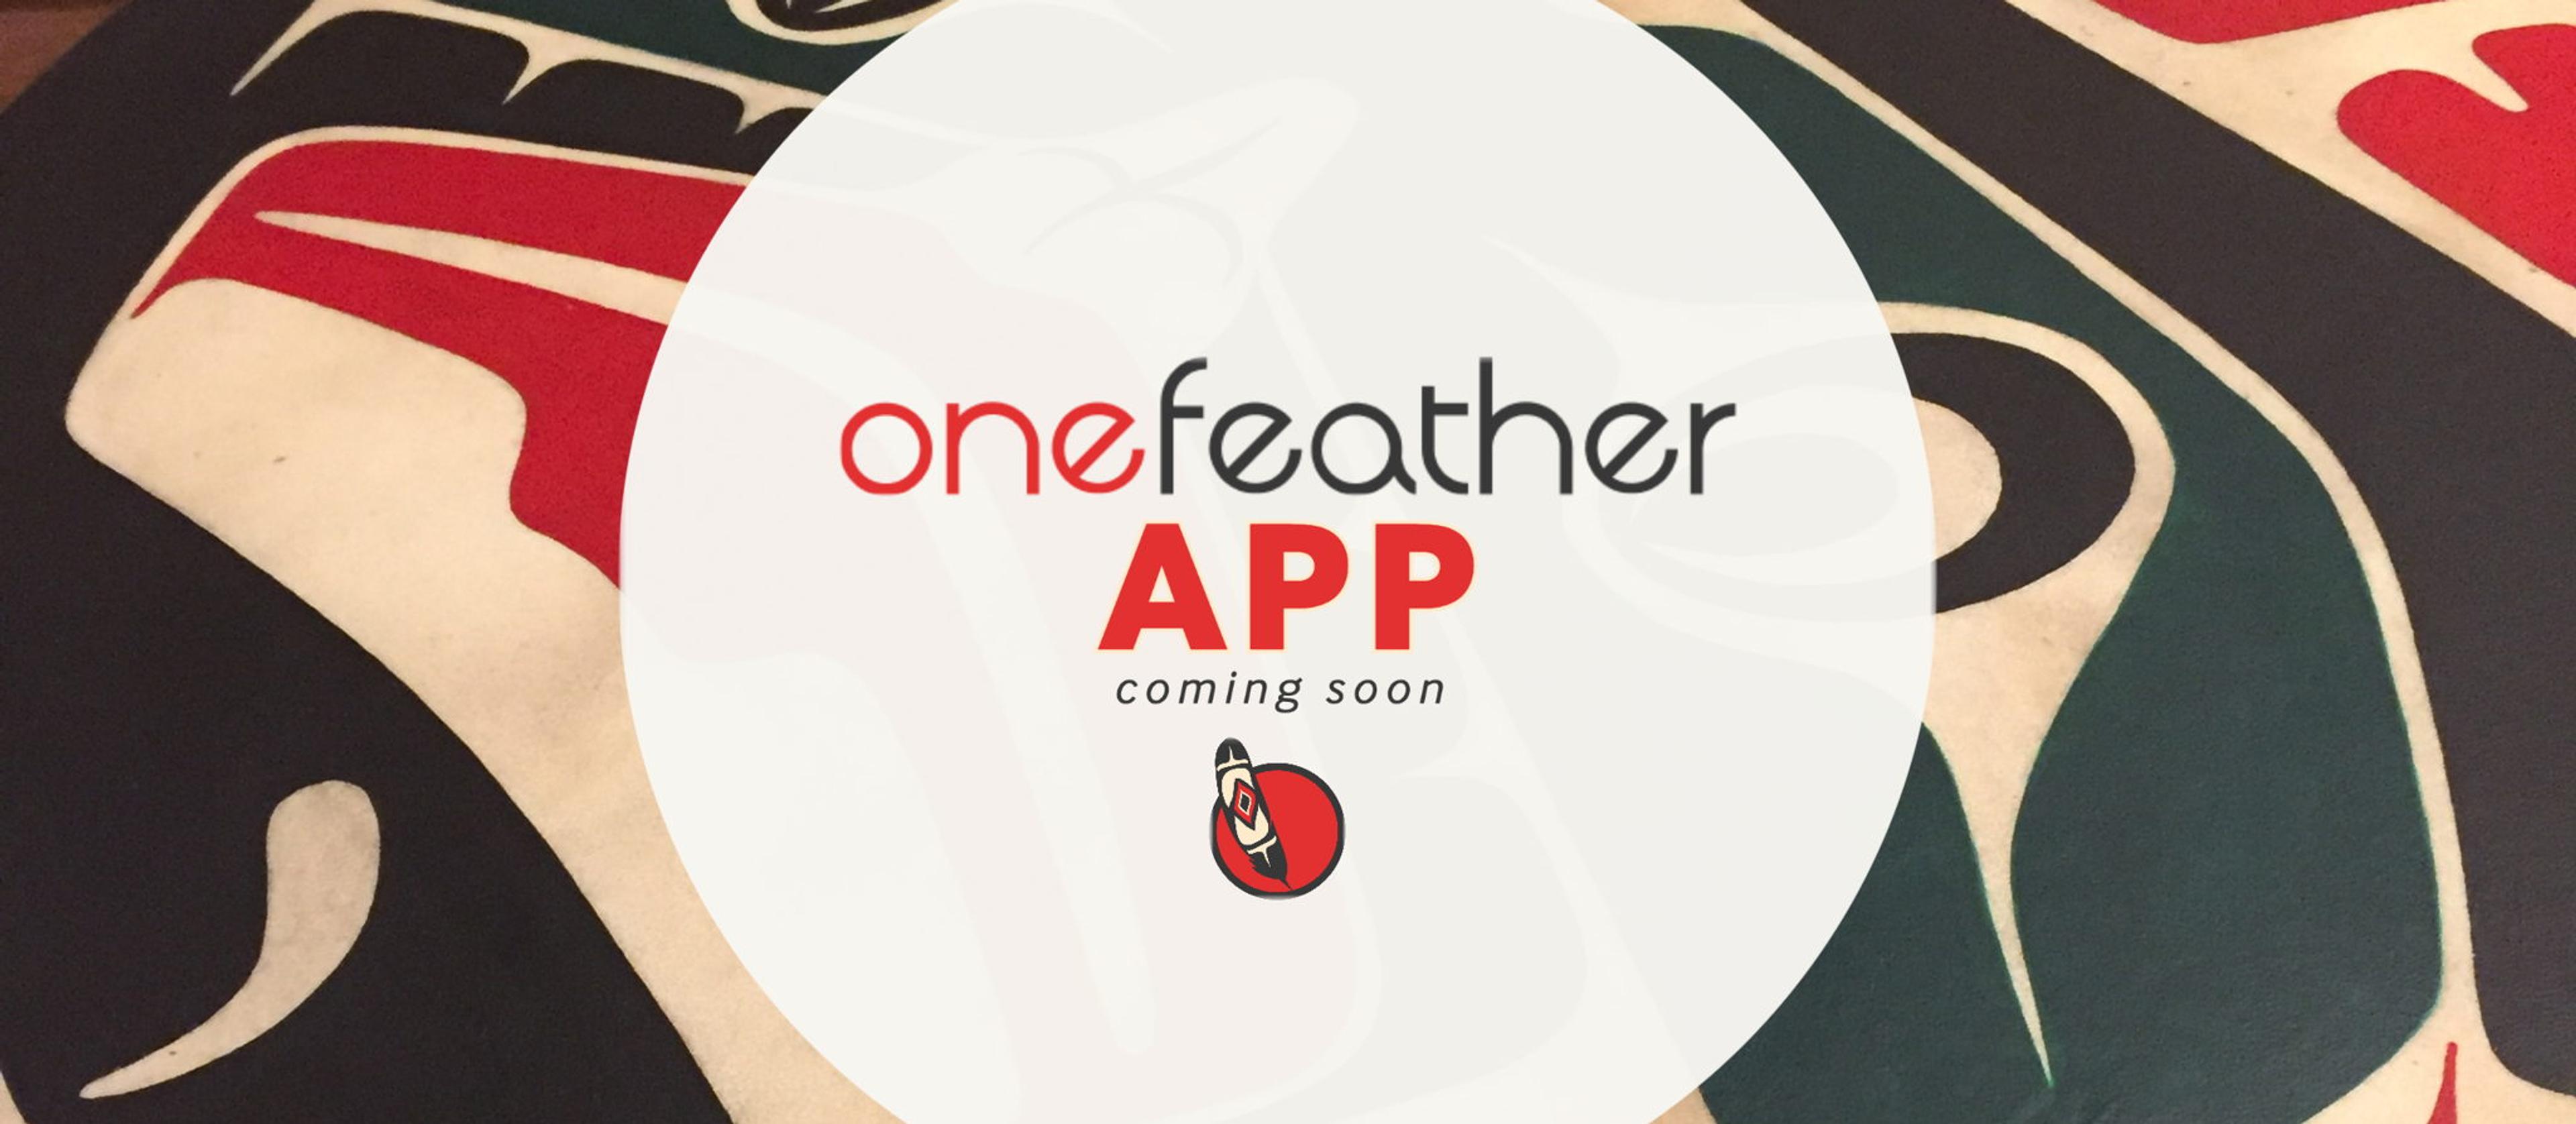 Cover Image for First Nations can soon bank (without stepping foot in a bank) and renew status cards from home – staying safe and sovereign with the OneFeather APP.